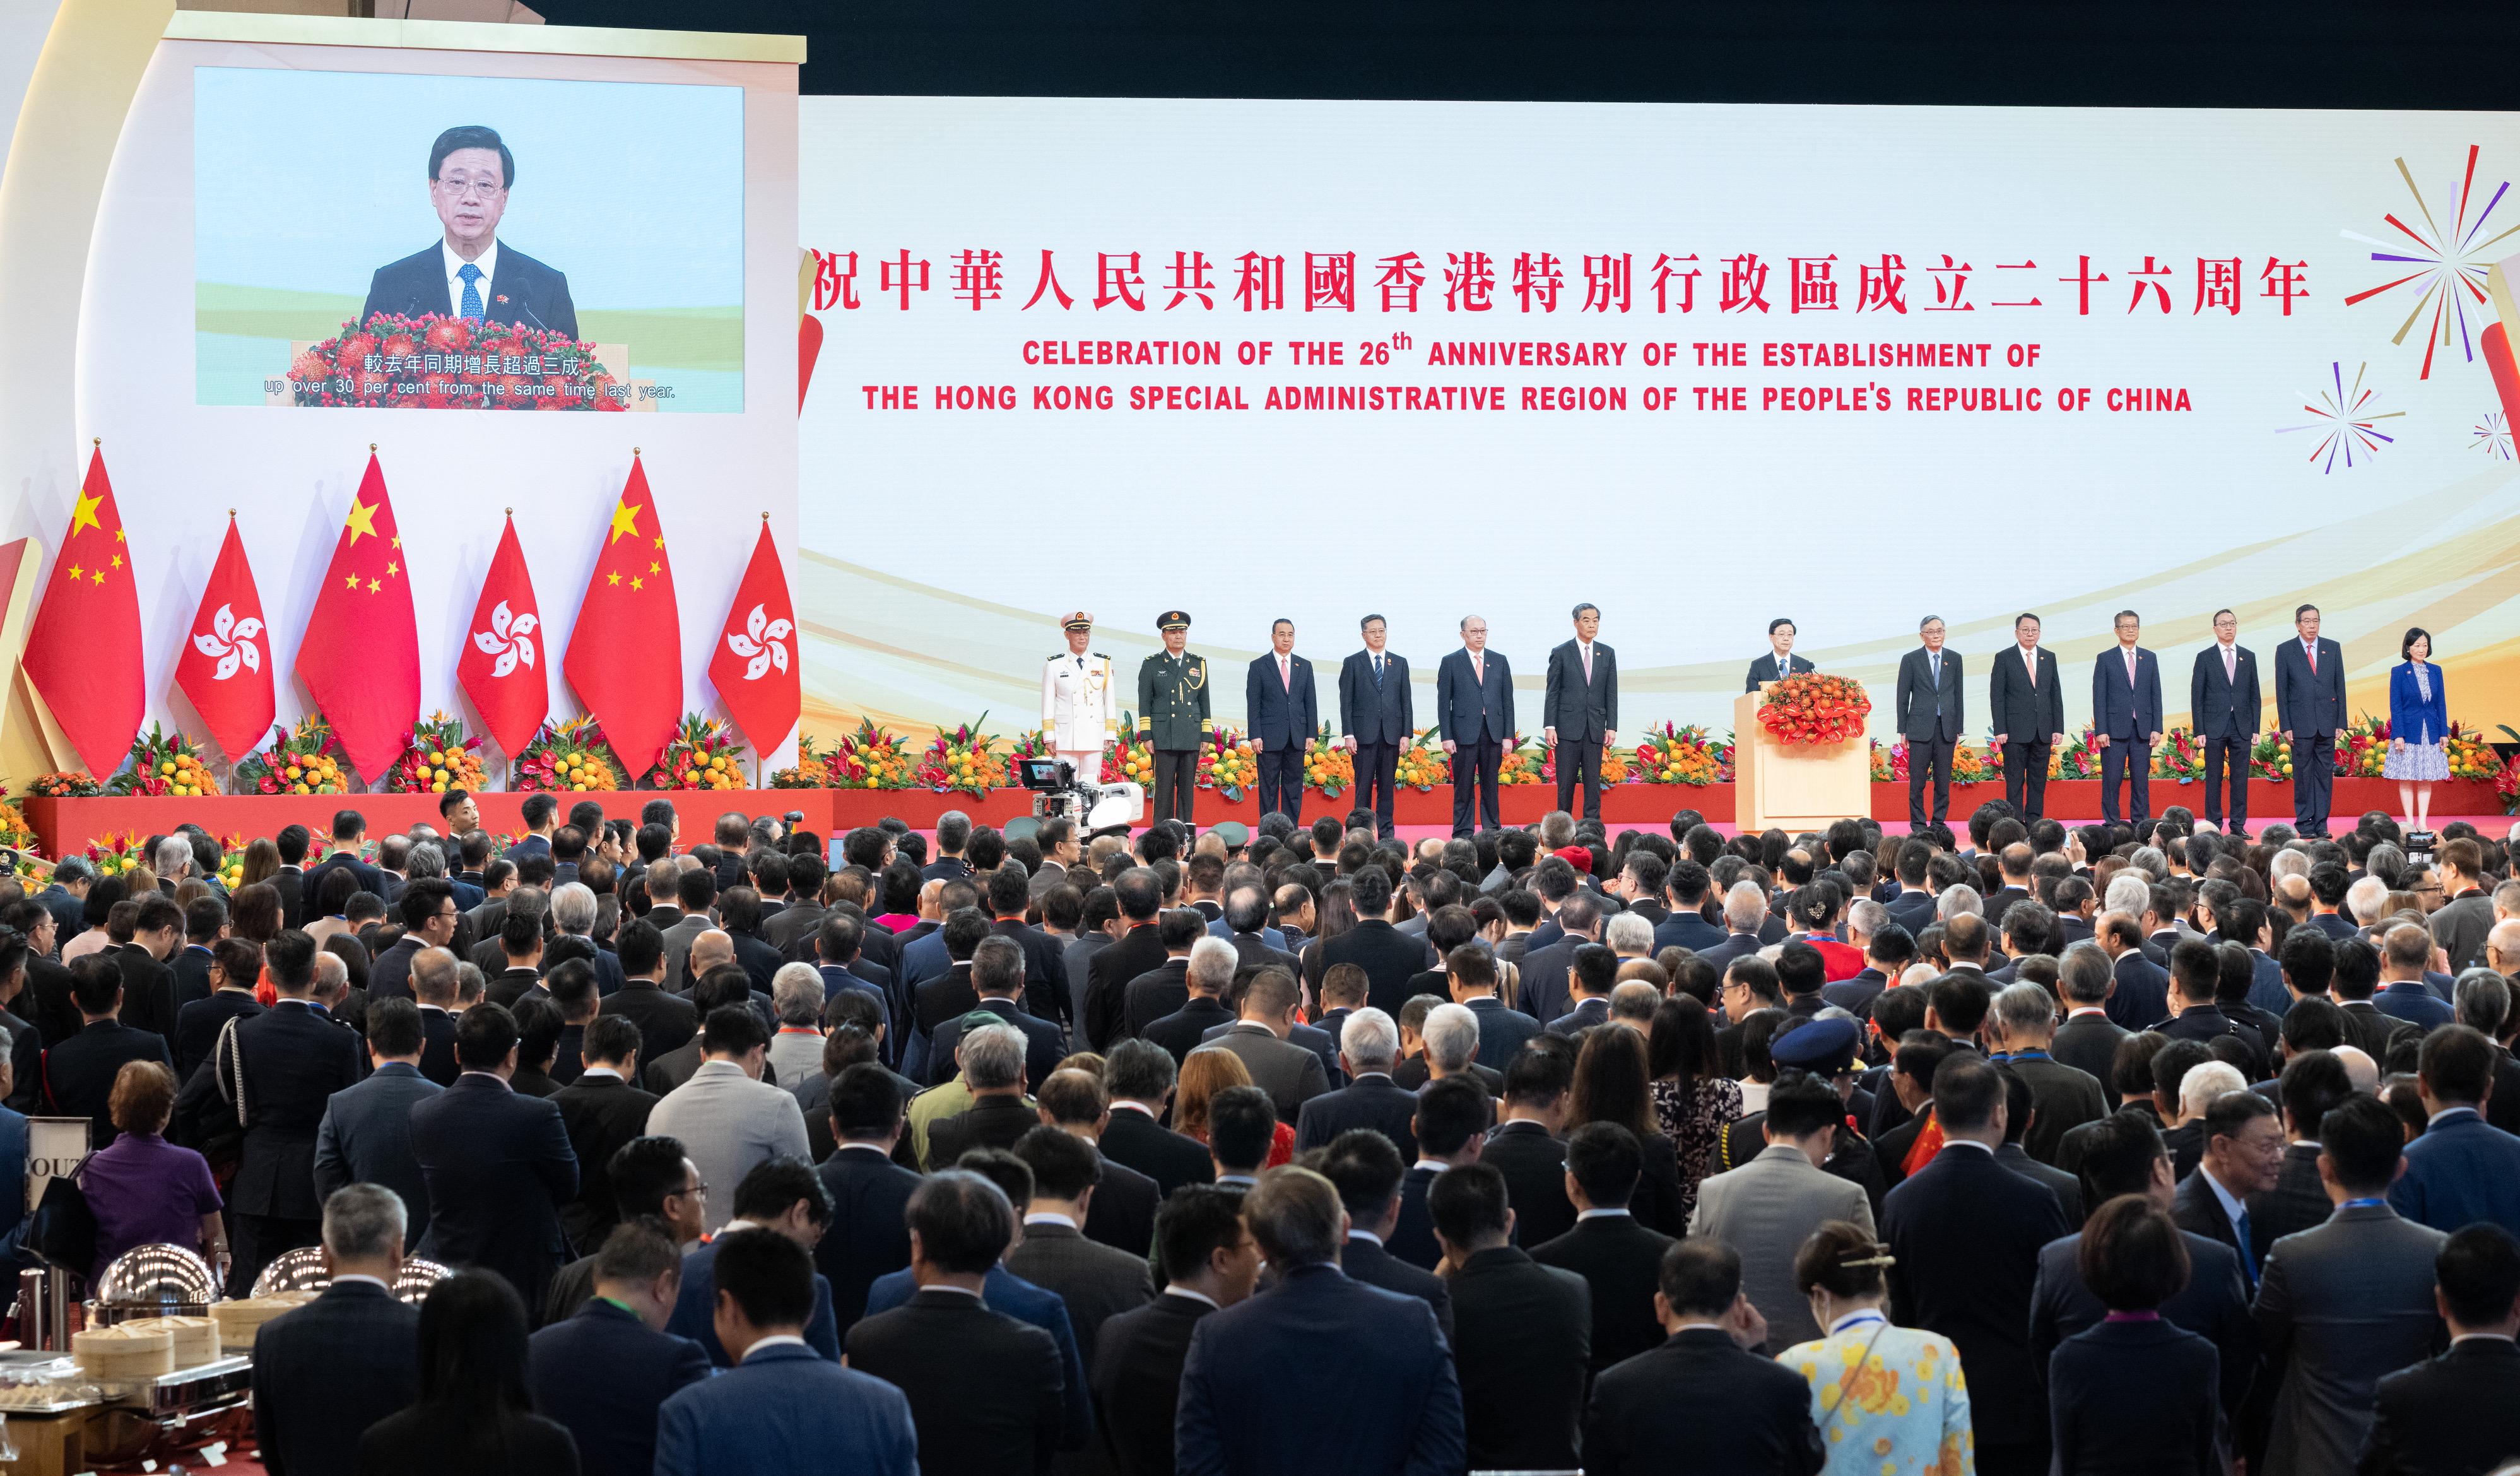 The Chief Executive, Mr John Lee, together with Principal Officials and guests, attends the reception for the 26th anniversary of the establishment of the Hong Kong Special Administrative Region at the Hong Kong Convention and Exhibition Centre this morning (July 1).